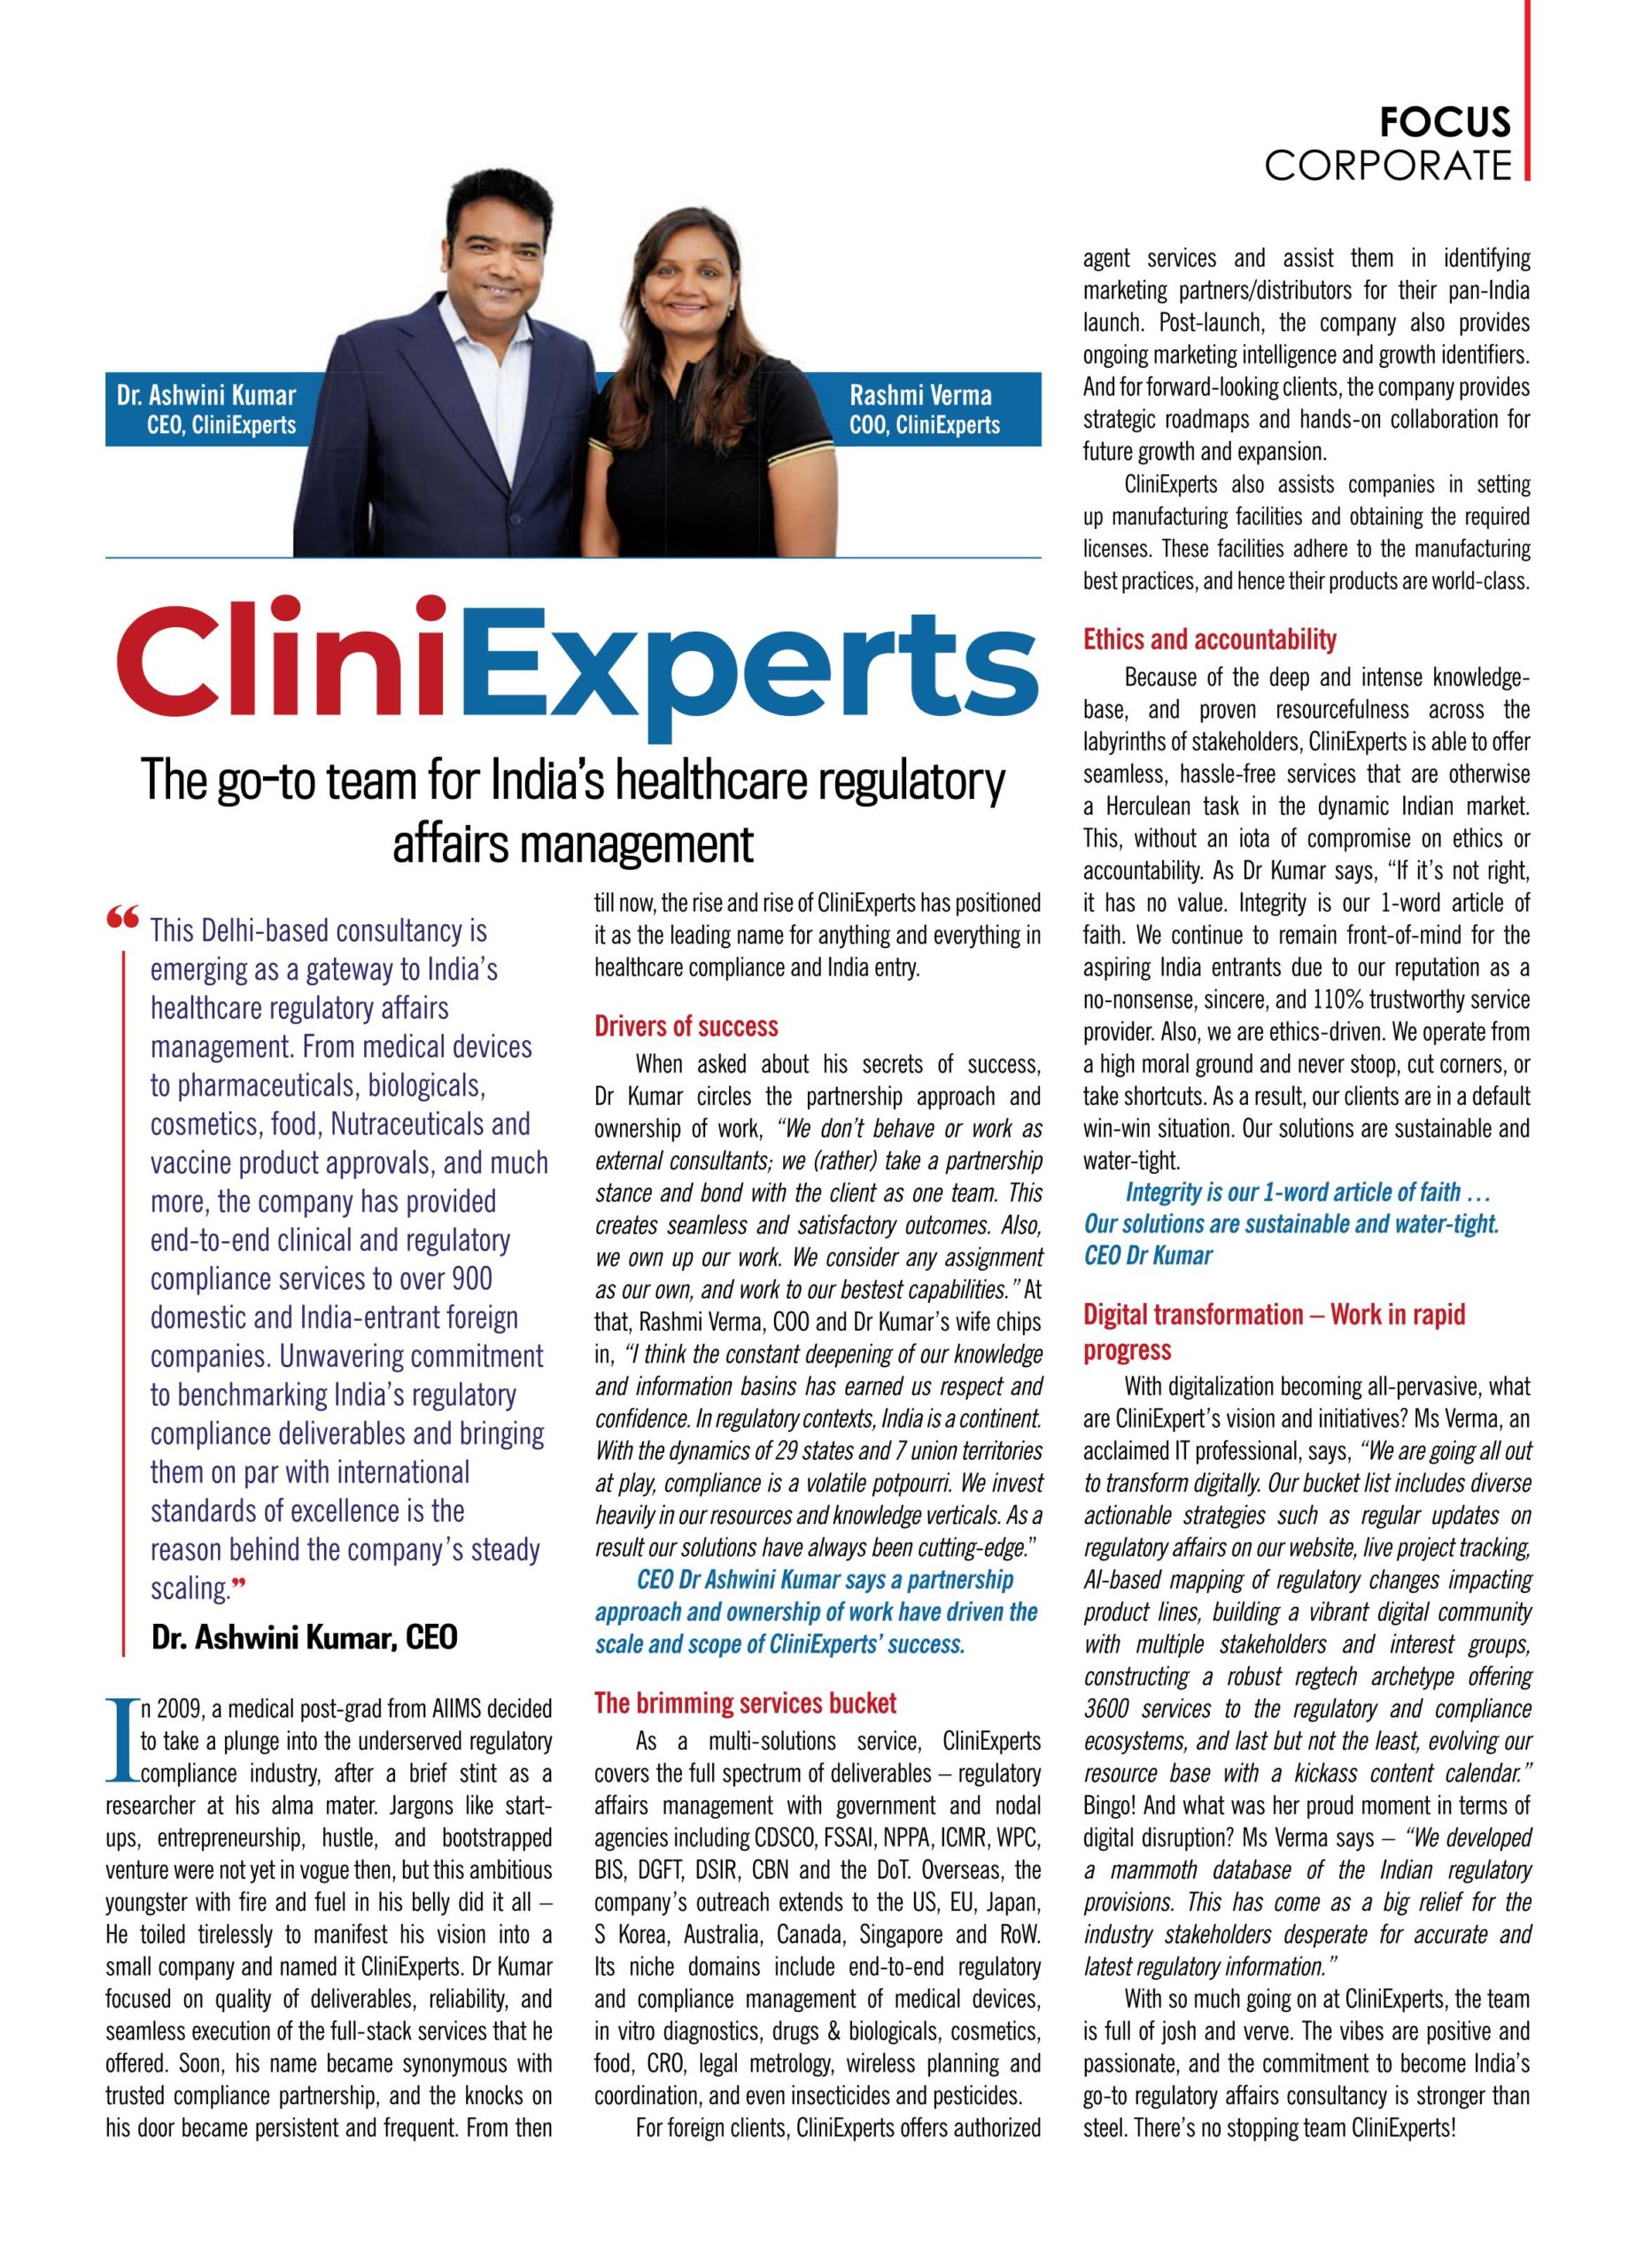 cliniexperts india today